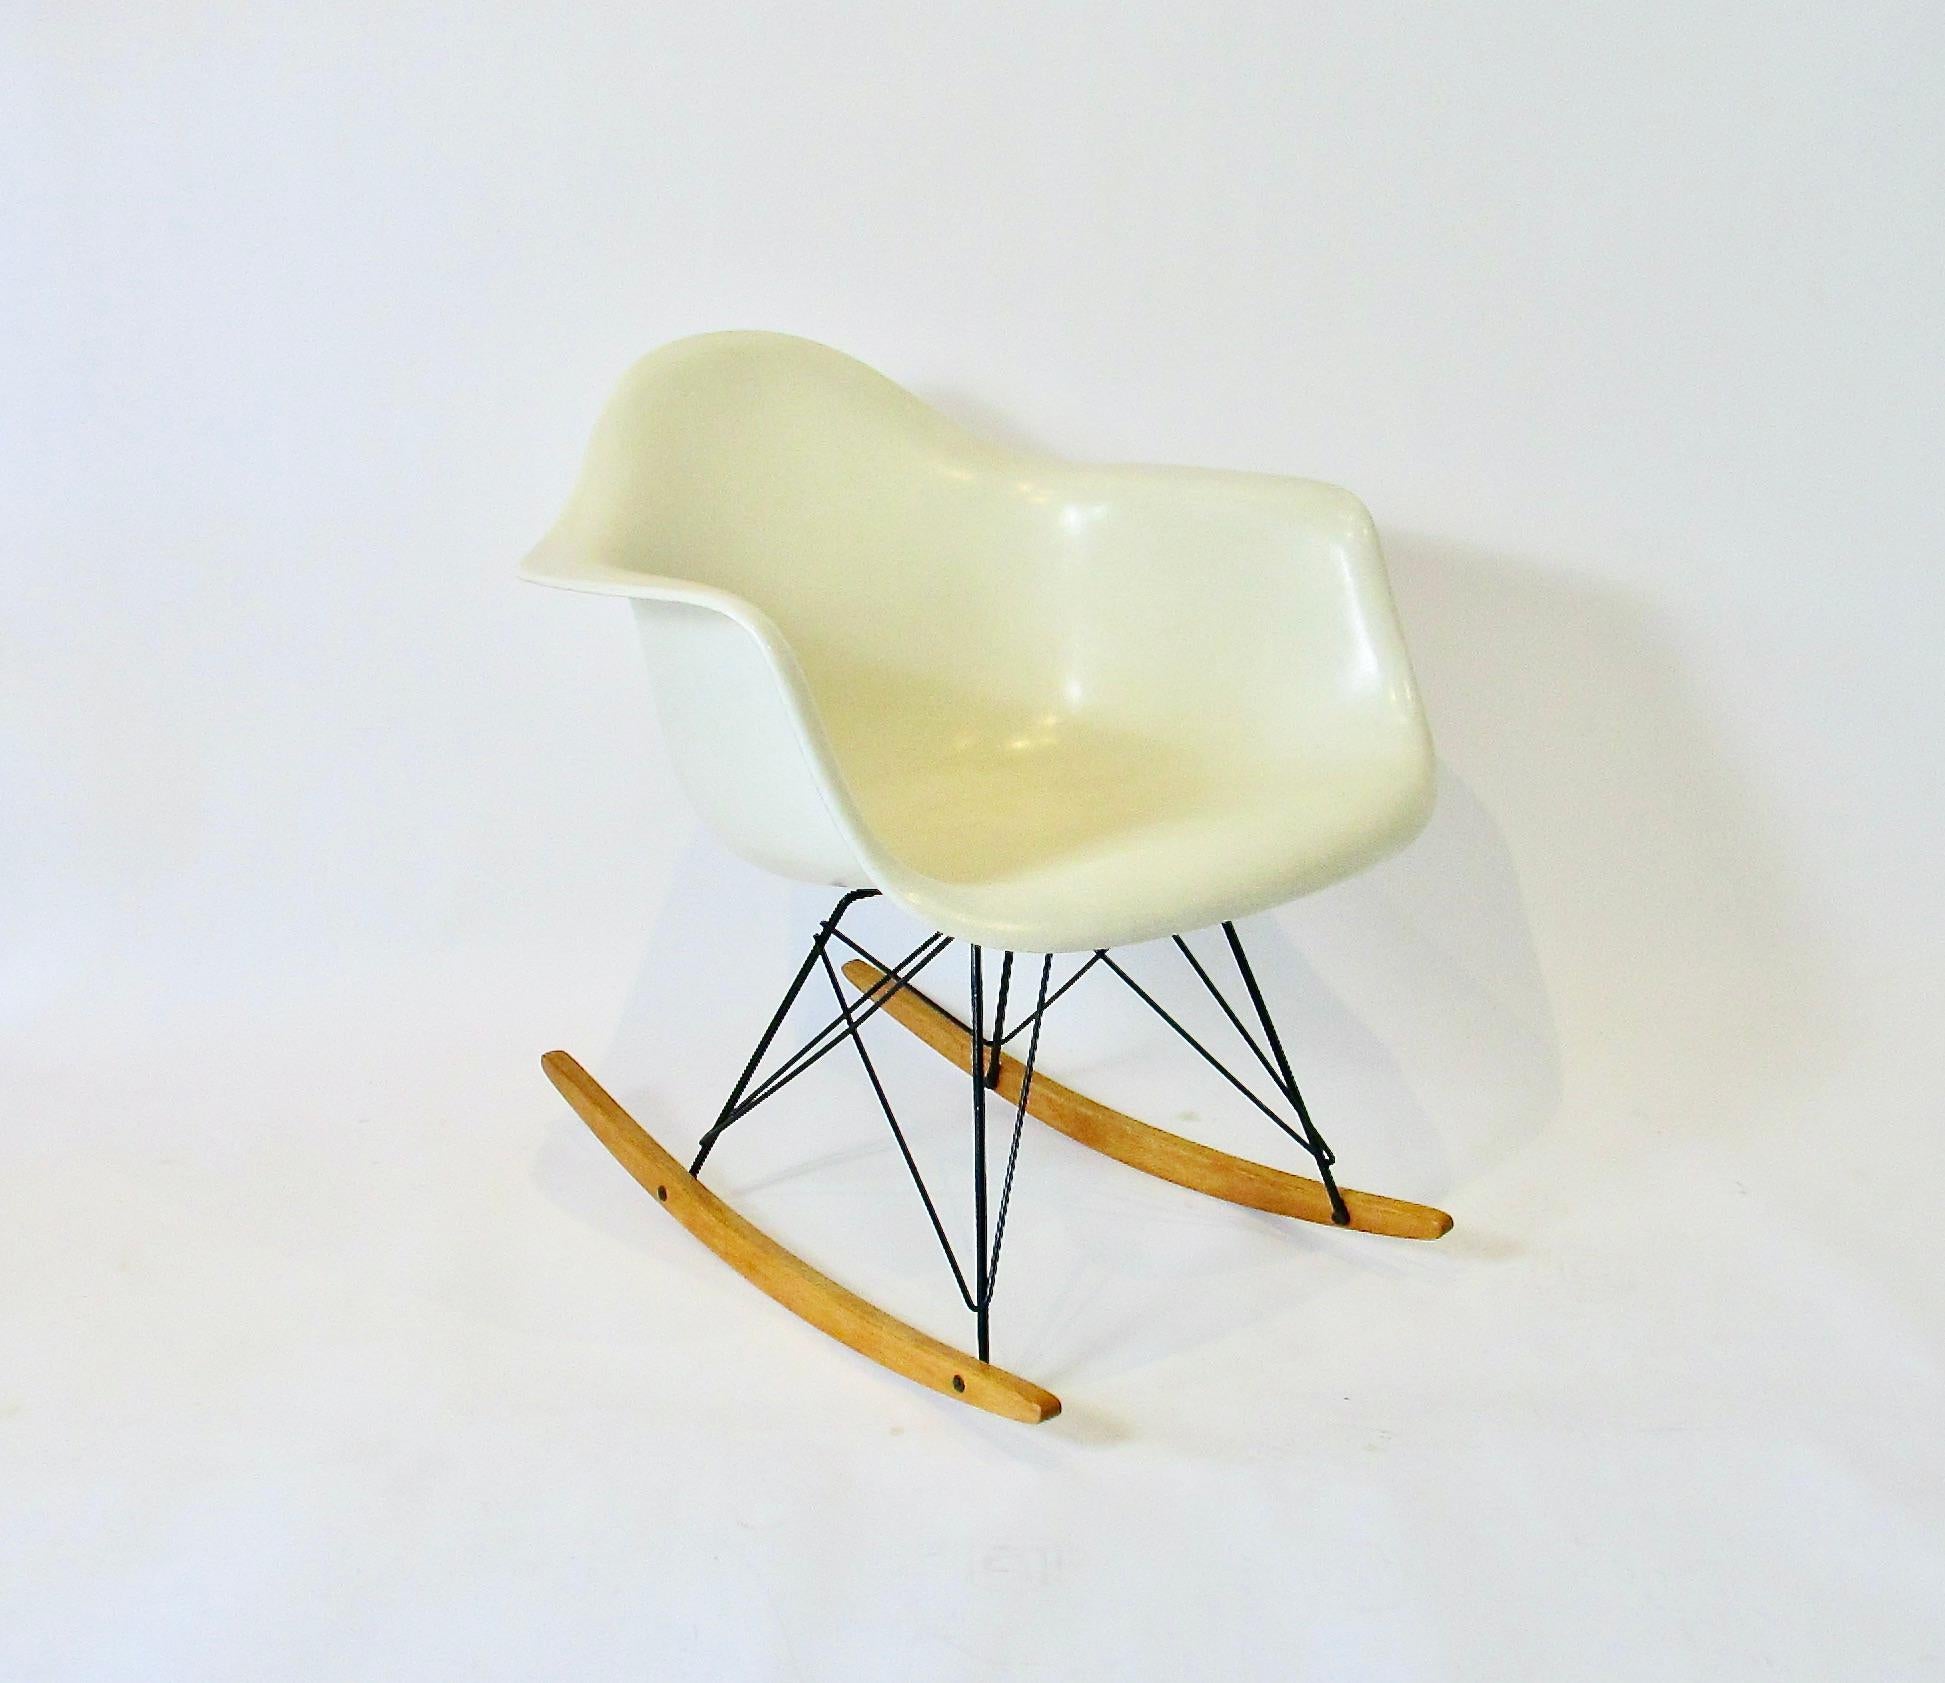 Charles and Ray Eames design for Herman Miller. RAR ( Rocking Arm steel Rod ) chair. Late 1950s production chair second generation shock mounts . Date stamp looks to be 1958 . Fine  condition with no blemishes or shock mount bleed through. Maple